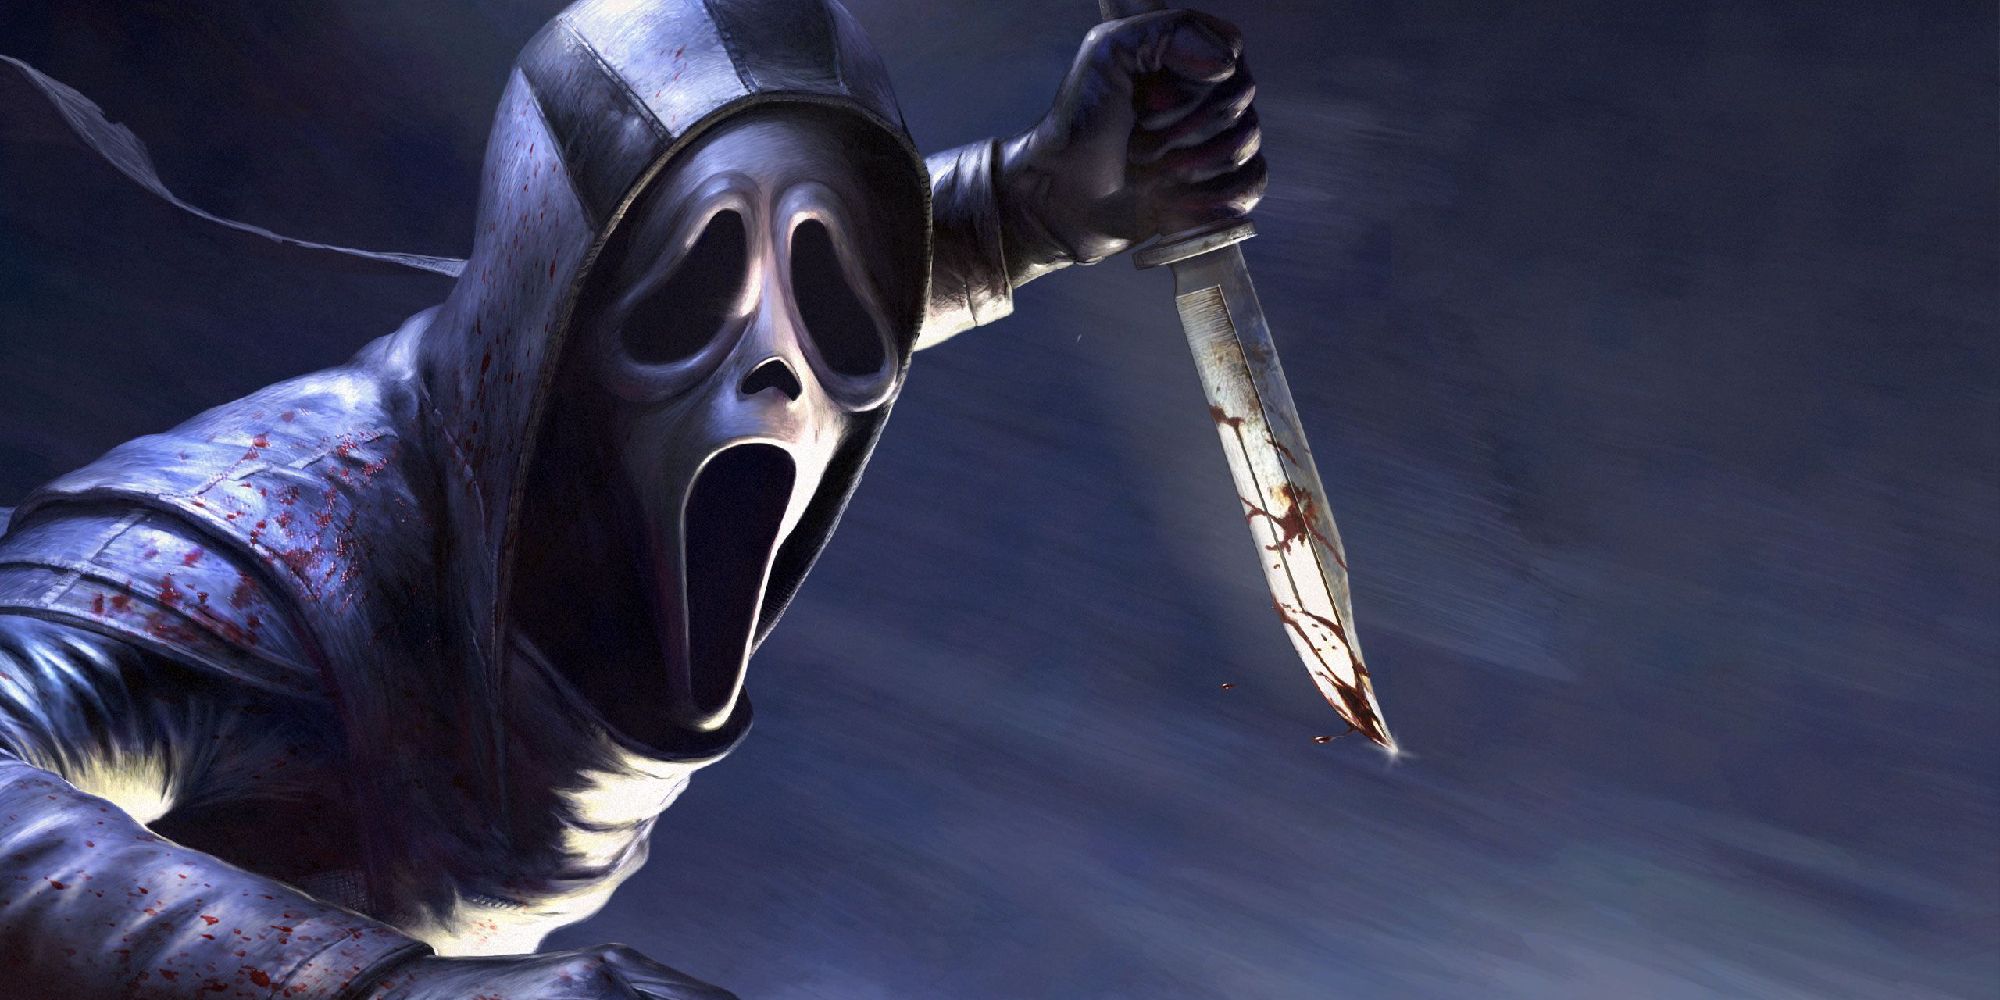 Ghostface as seen in Dead by Daylight, swooping in from one side with a bloody combat knife. 